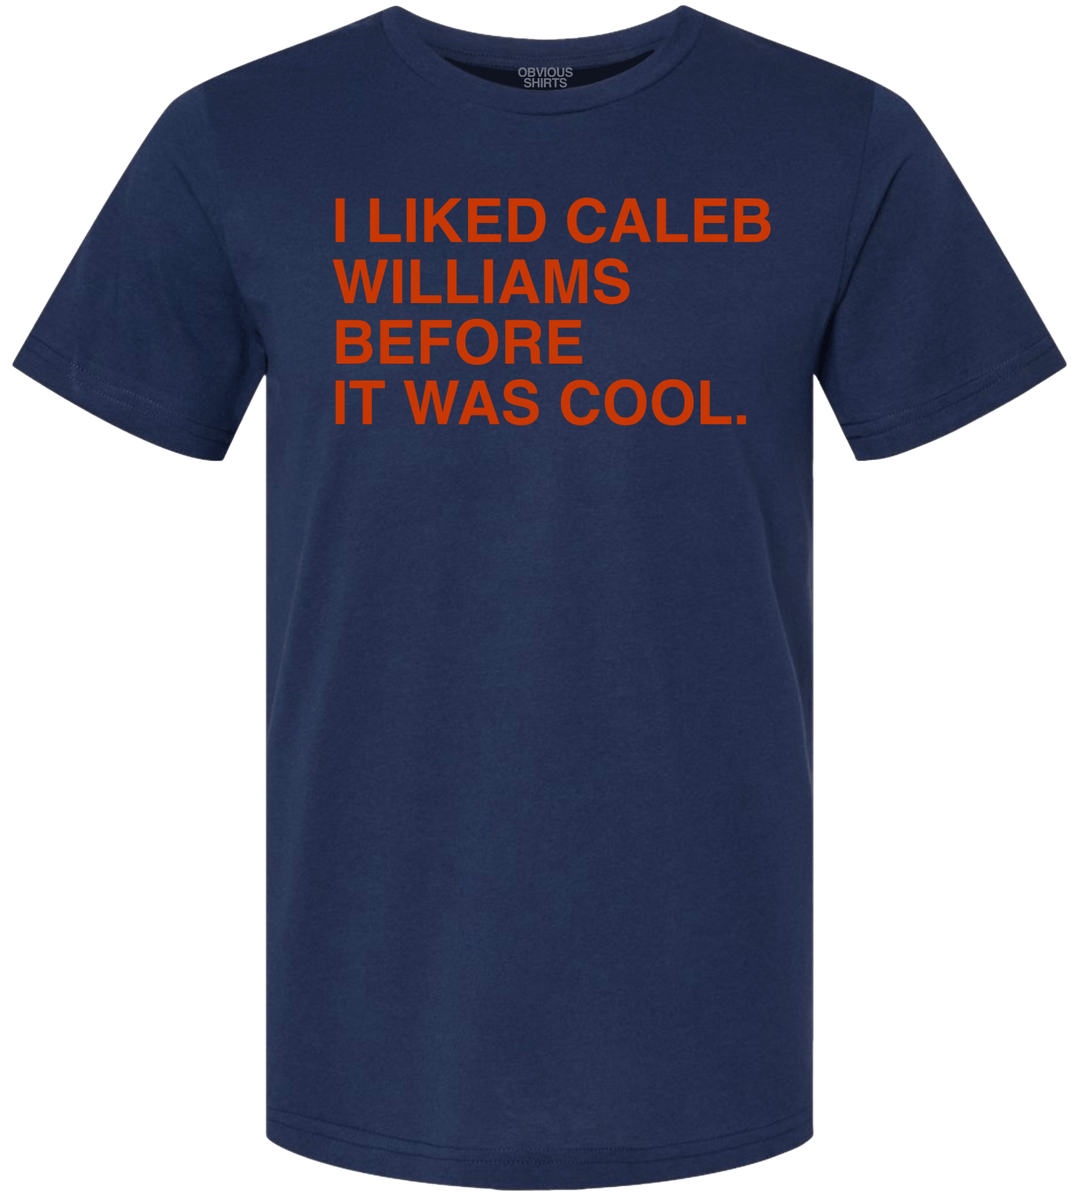 I LIKED CALEB WILLIAMS BEFORE IT WAS COOL. - OBVIOUS SHIRTS